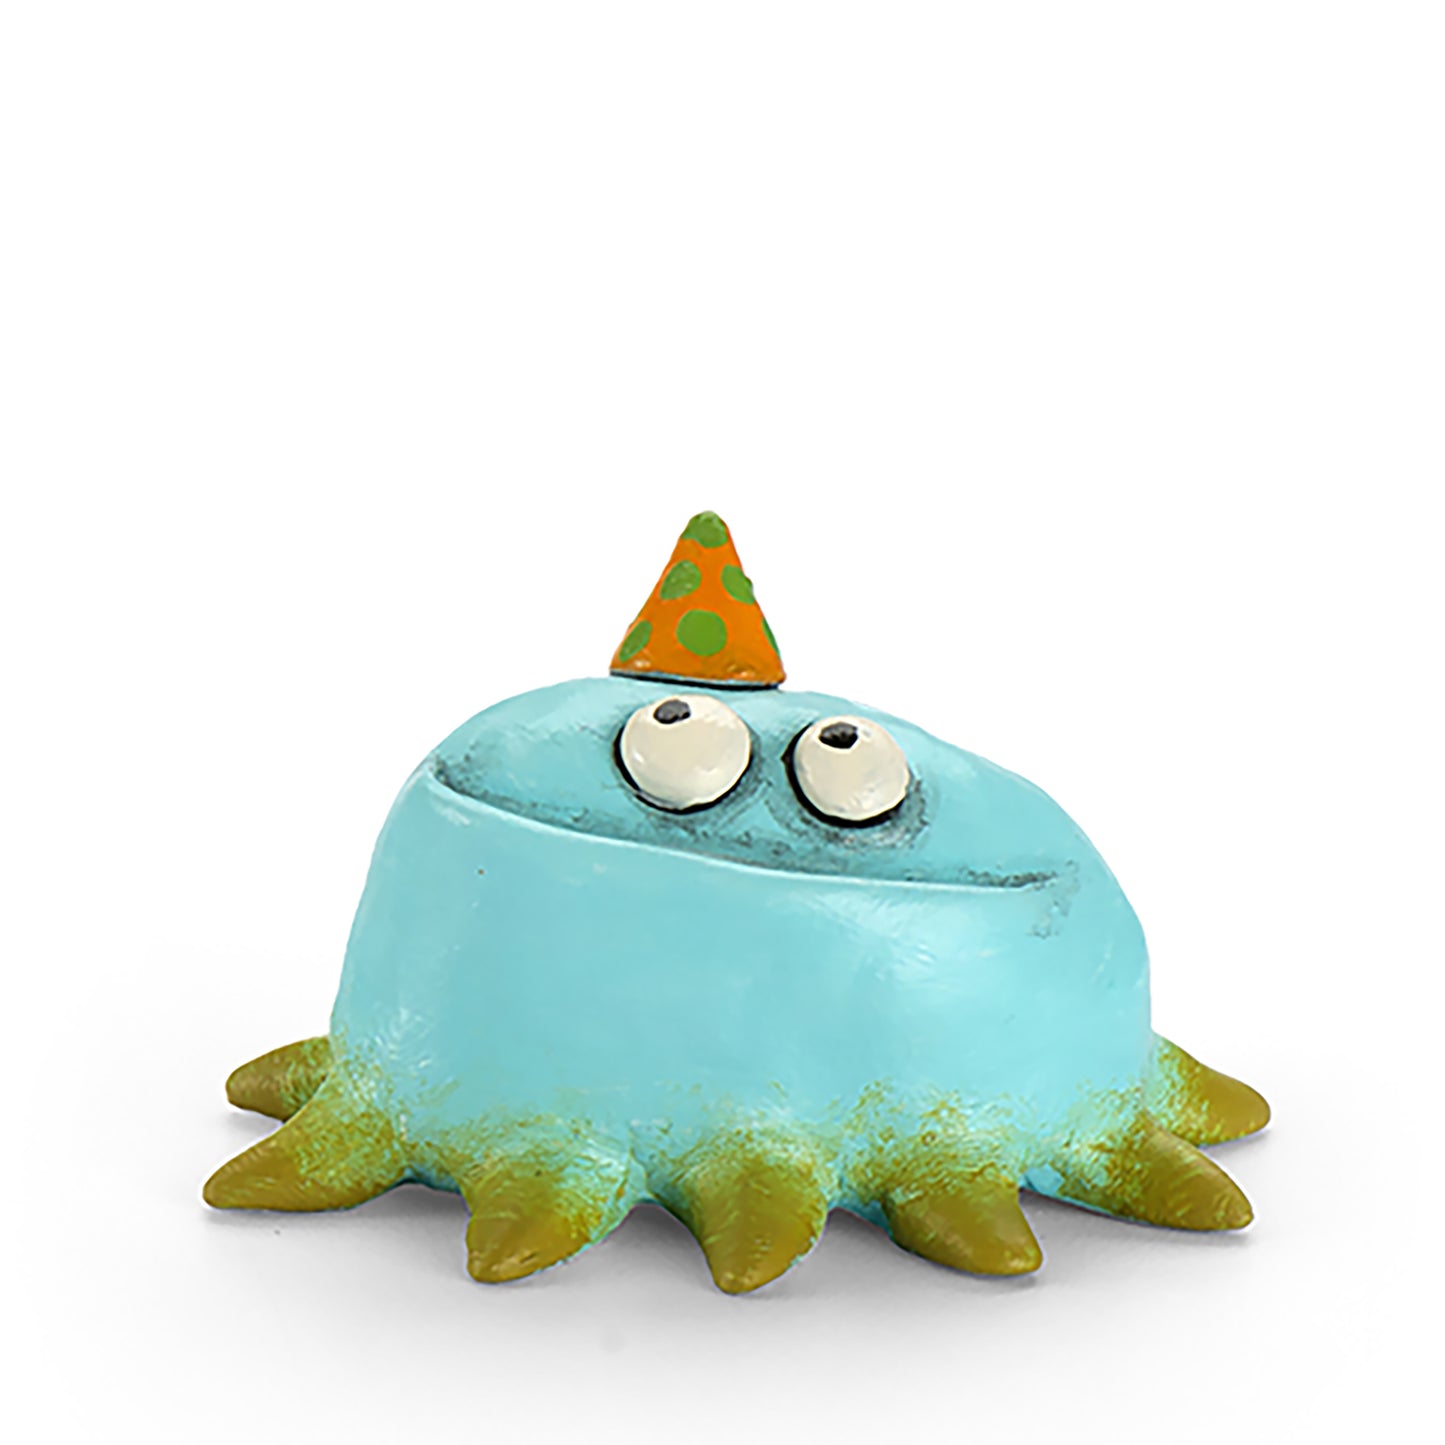 Fiesta the Party Blob - Comes with 2 greeting cards!